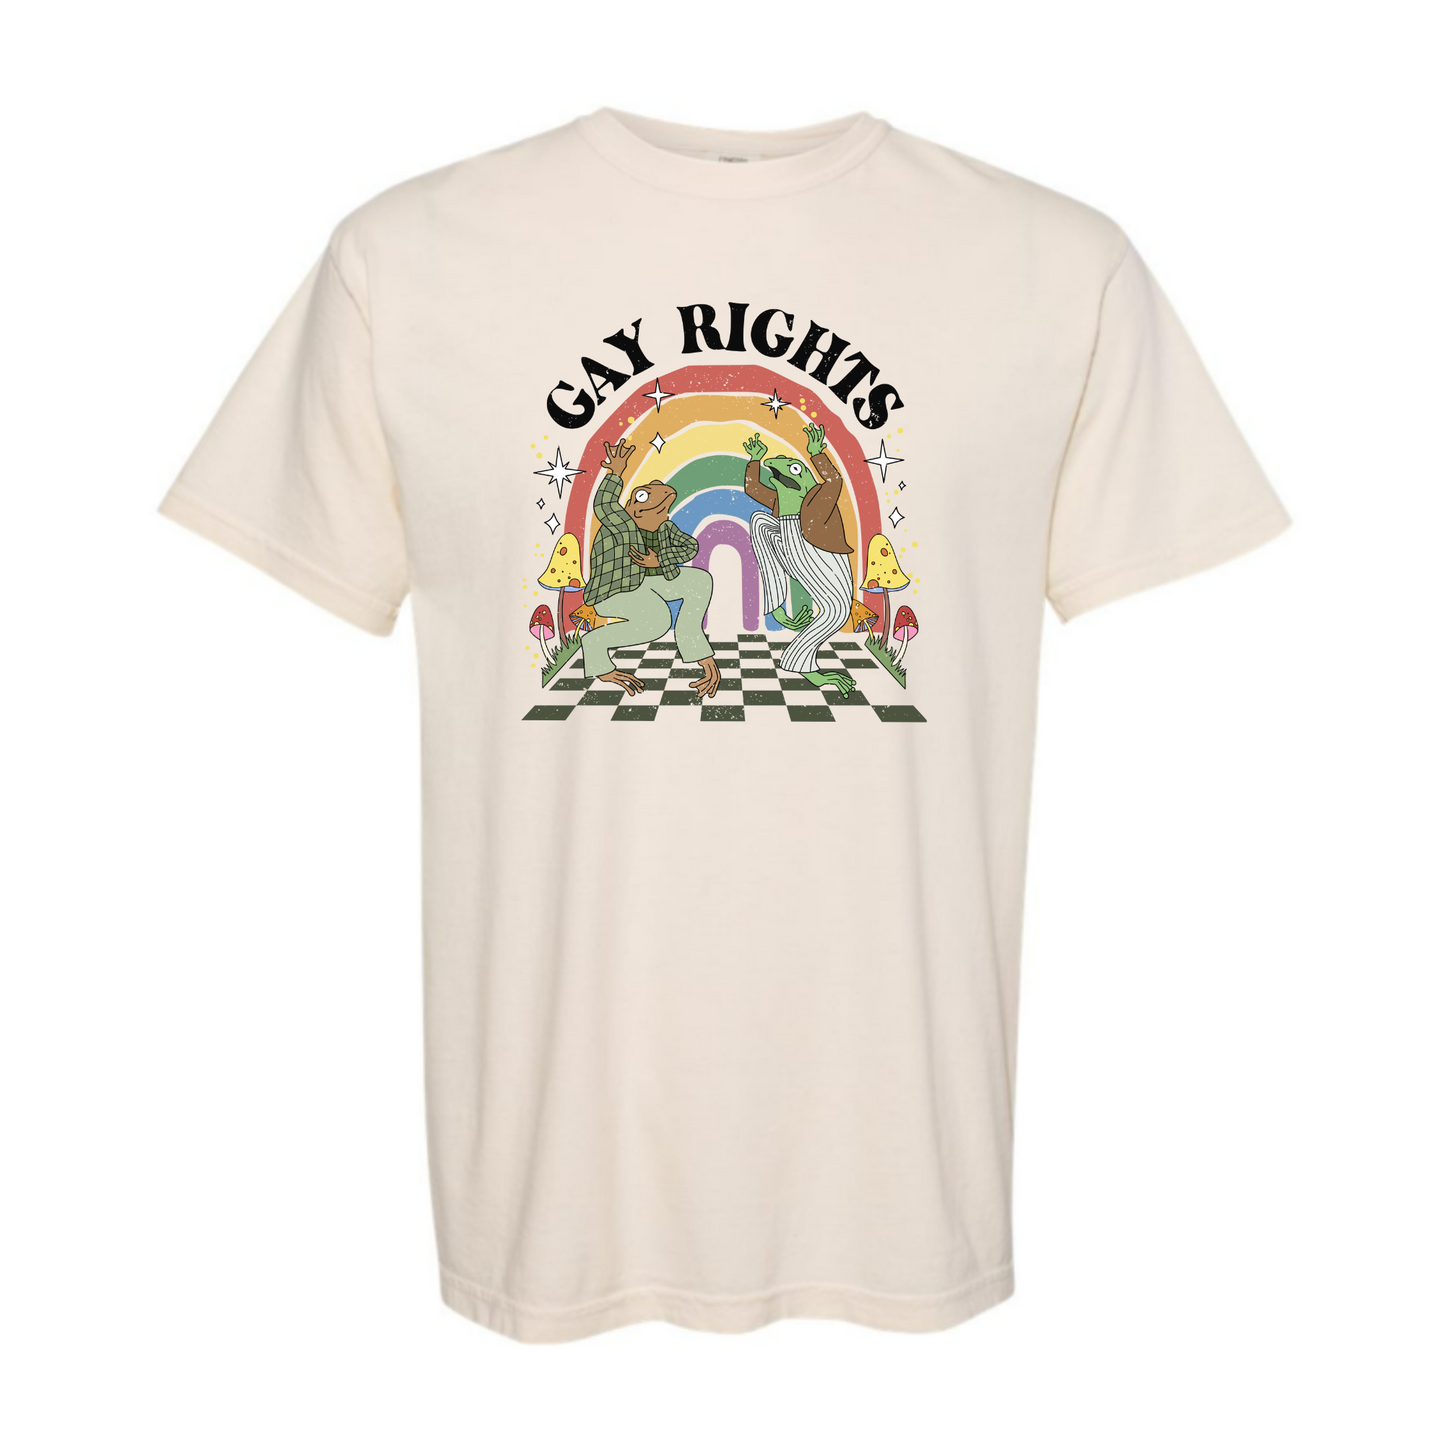 An ivory shirt with Gay Rights and a Frog and Toad dancing on a checked floor surrounded by mushrooms and with a rainbow in the background